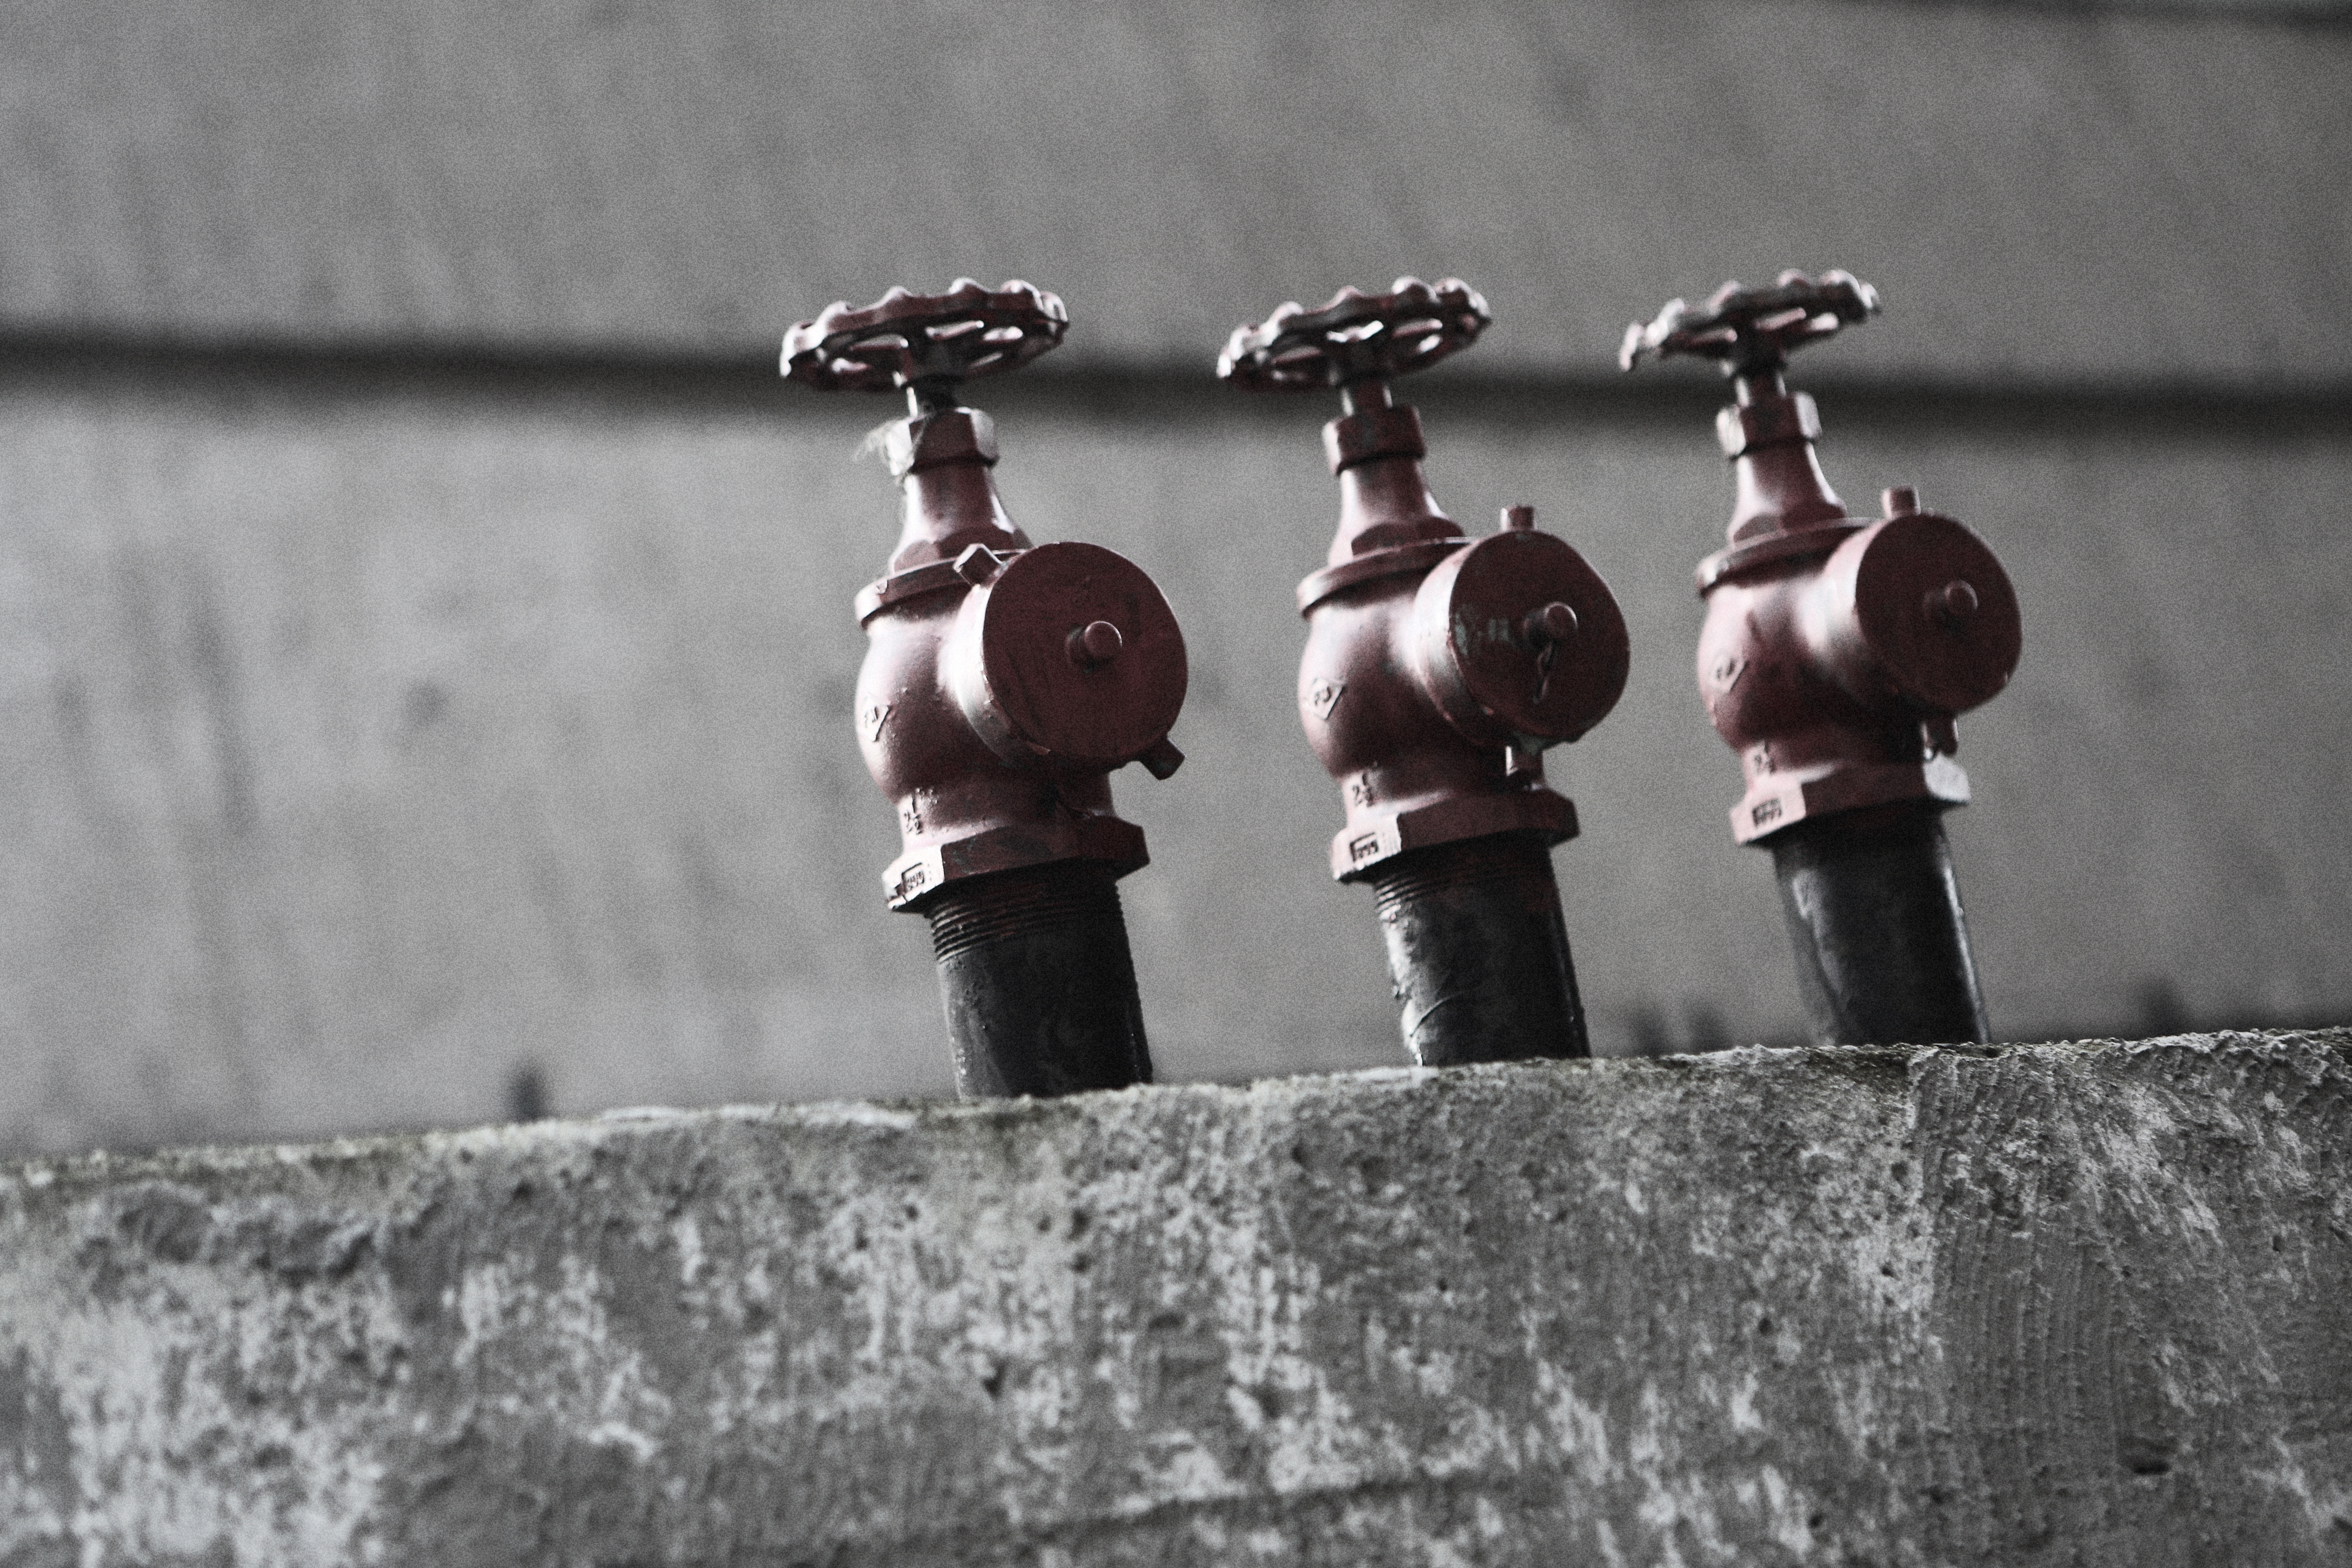 4-Life-of-Pix-free-stock-photos-fire-hydrant-montreal-industrial